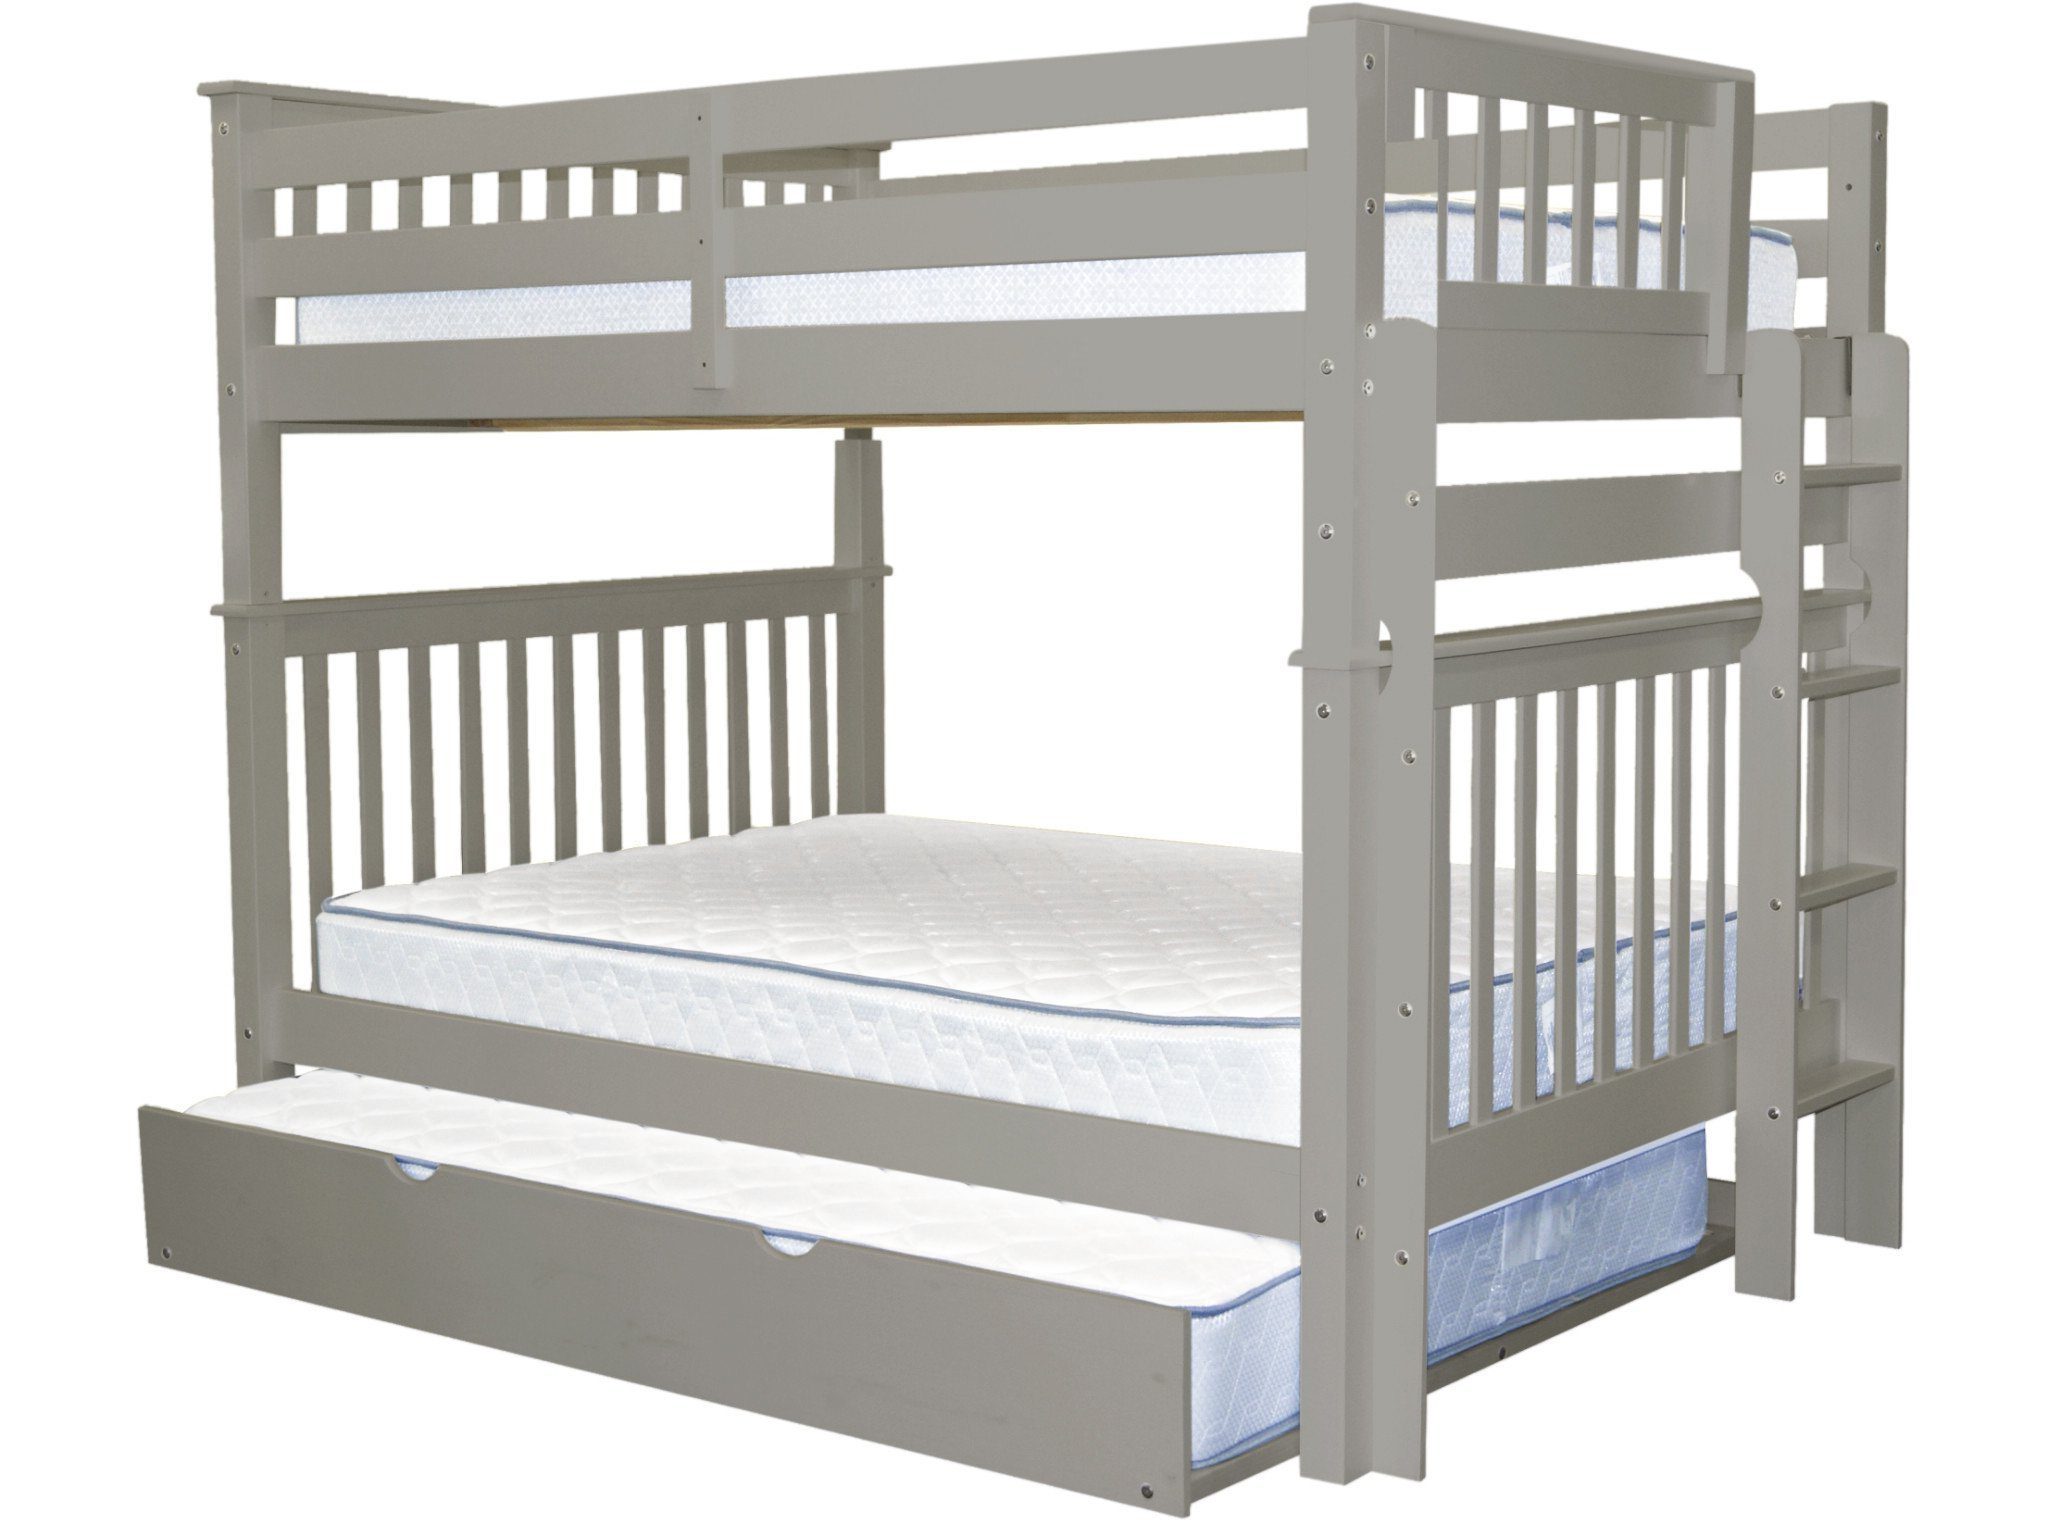 Bunk Bed King Mission Style, Bunk Bed With Ladder On The End